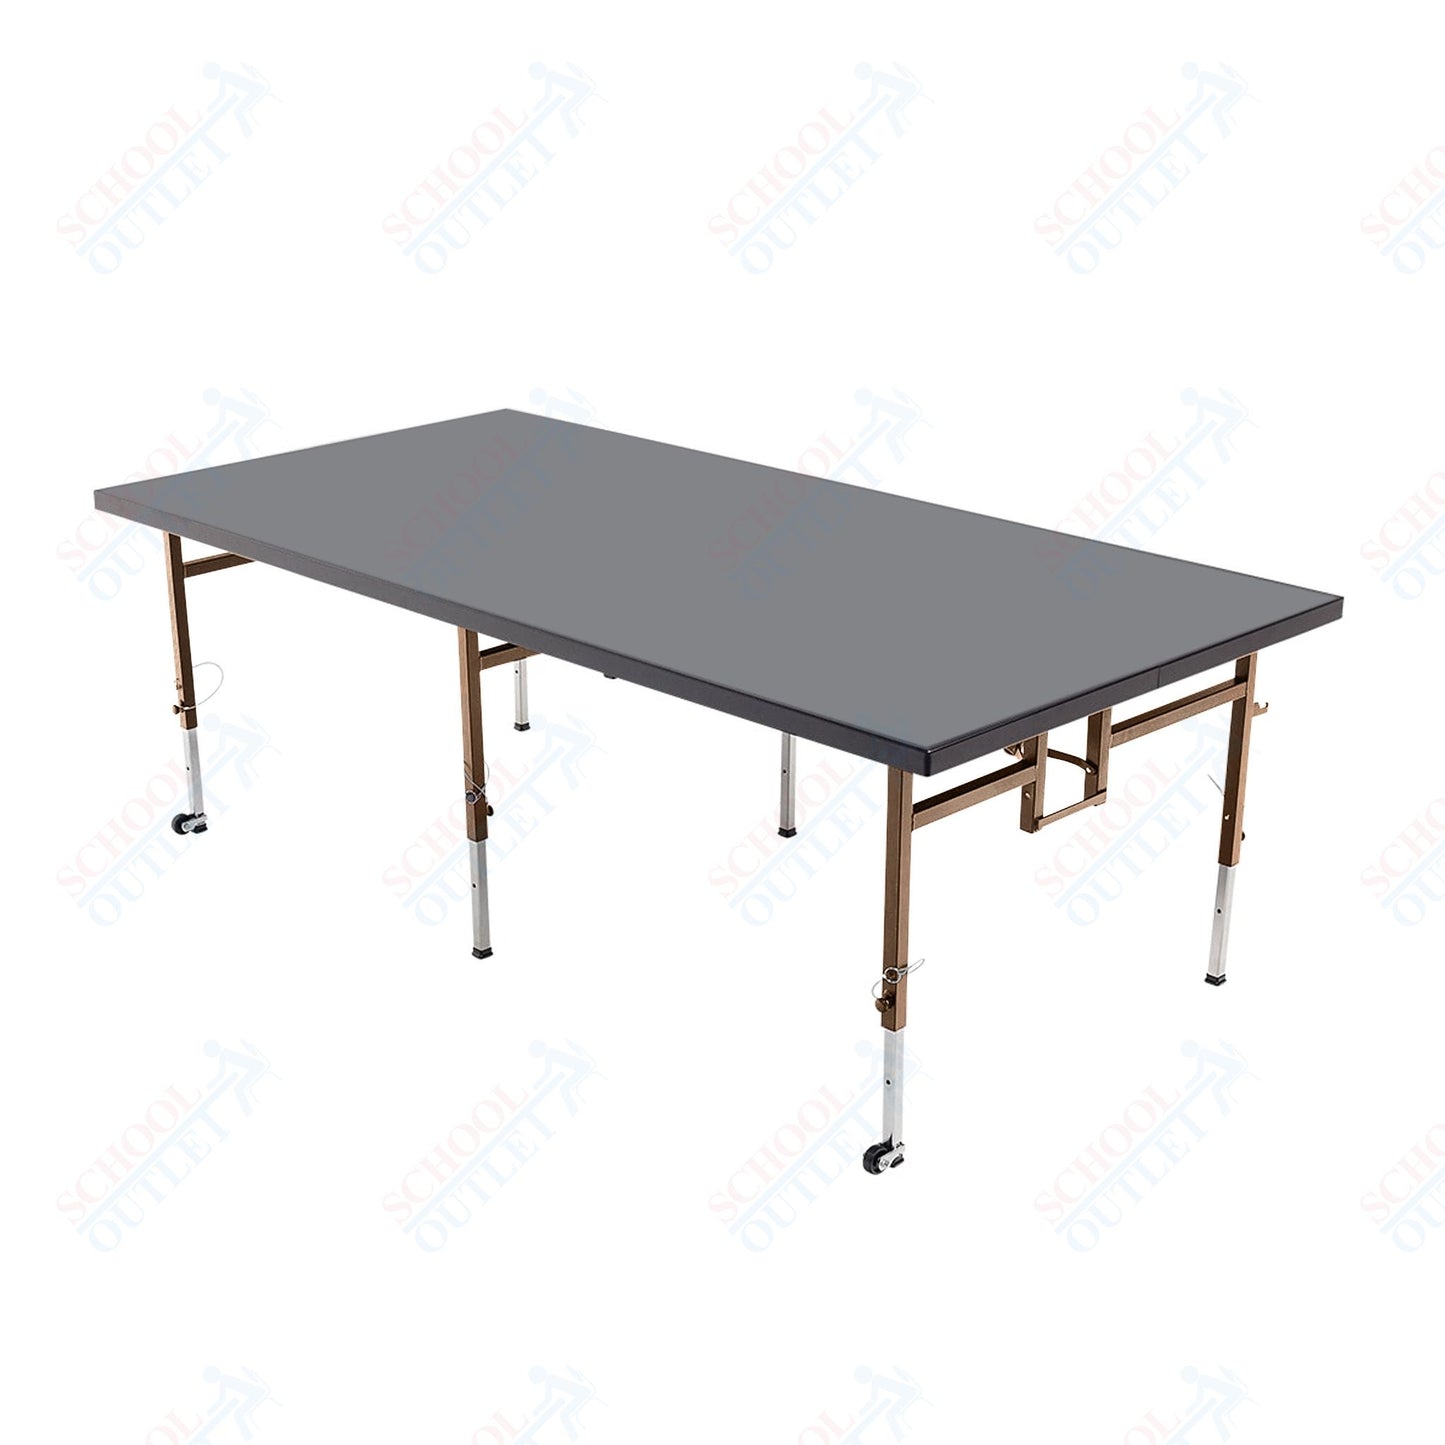 AmTab Adjustable Height Stage - Polypropylene Top - 48"W x 72"L x Adjustable 16" to 24"H  (AmTab AMT-STA4616P)